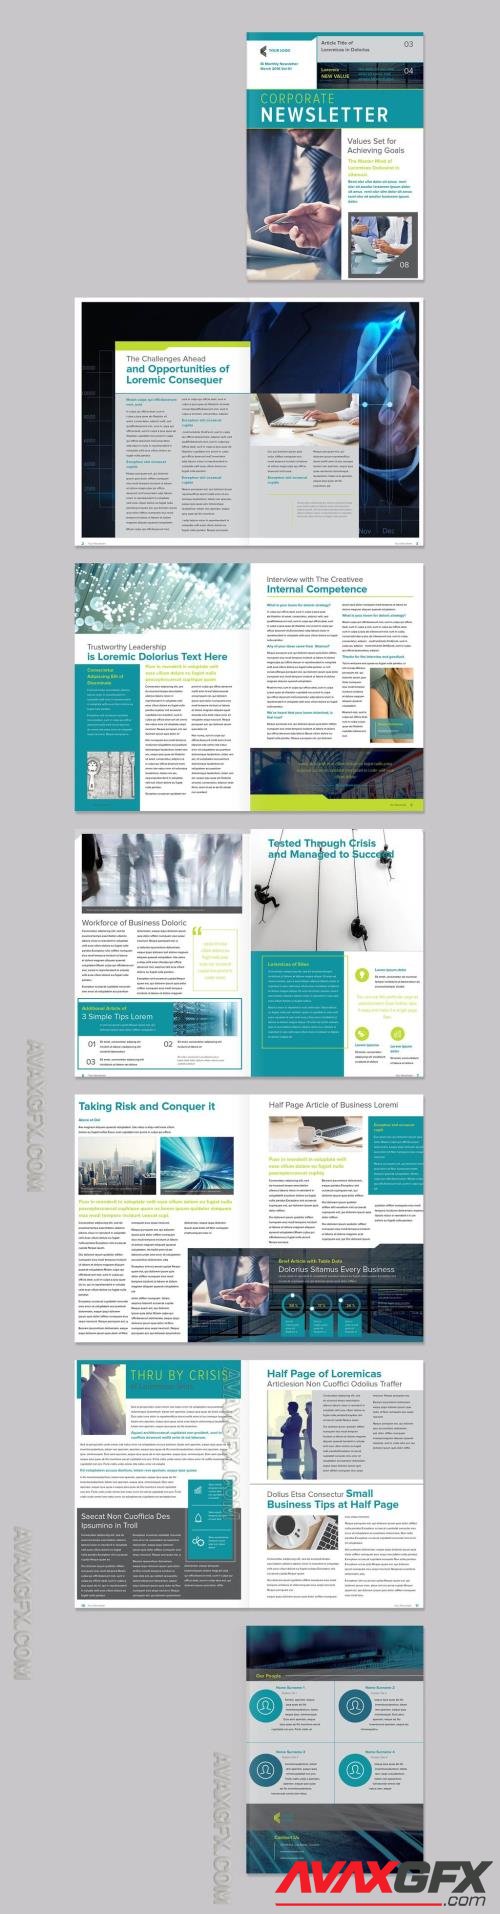 Newsletter Layout with Turquoise Accents 220996950 [Adobestock]